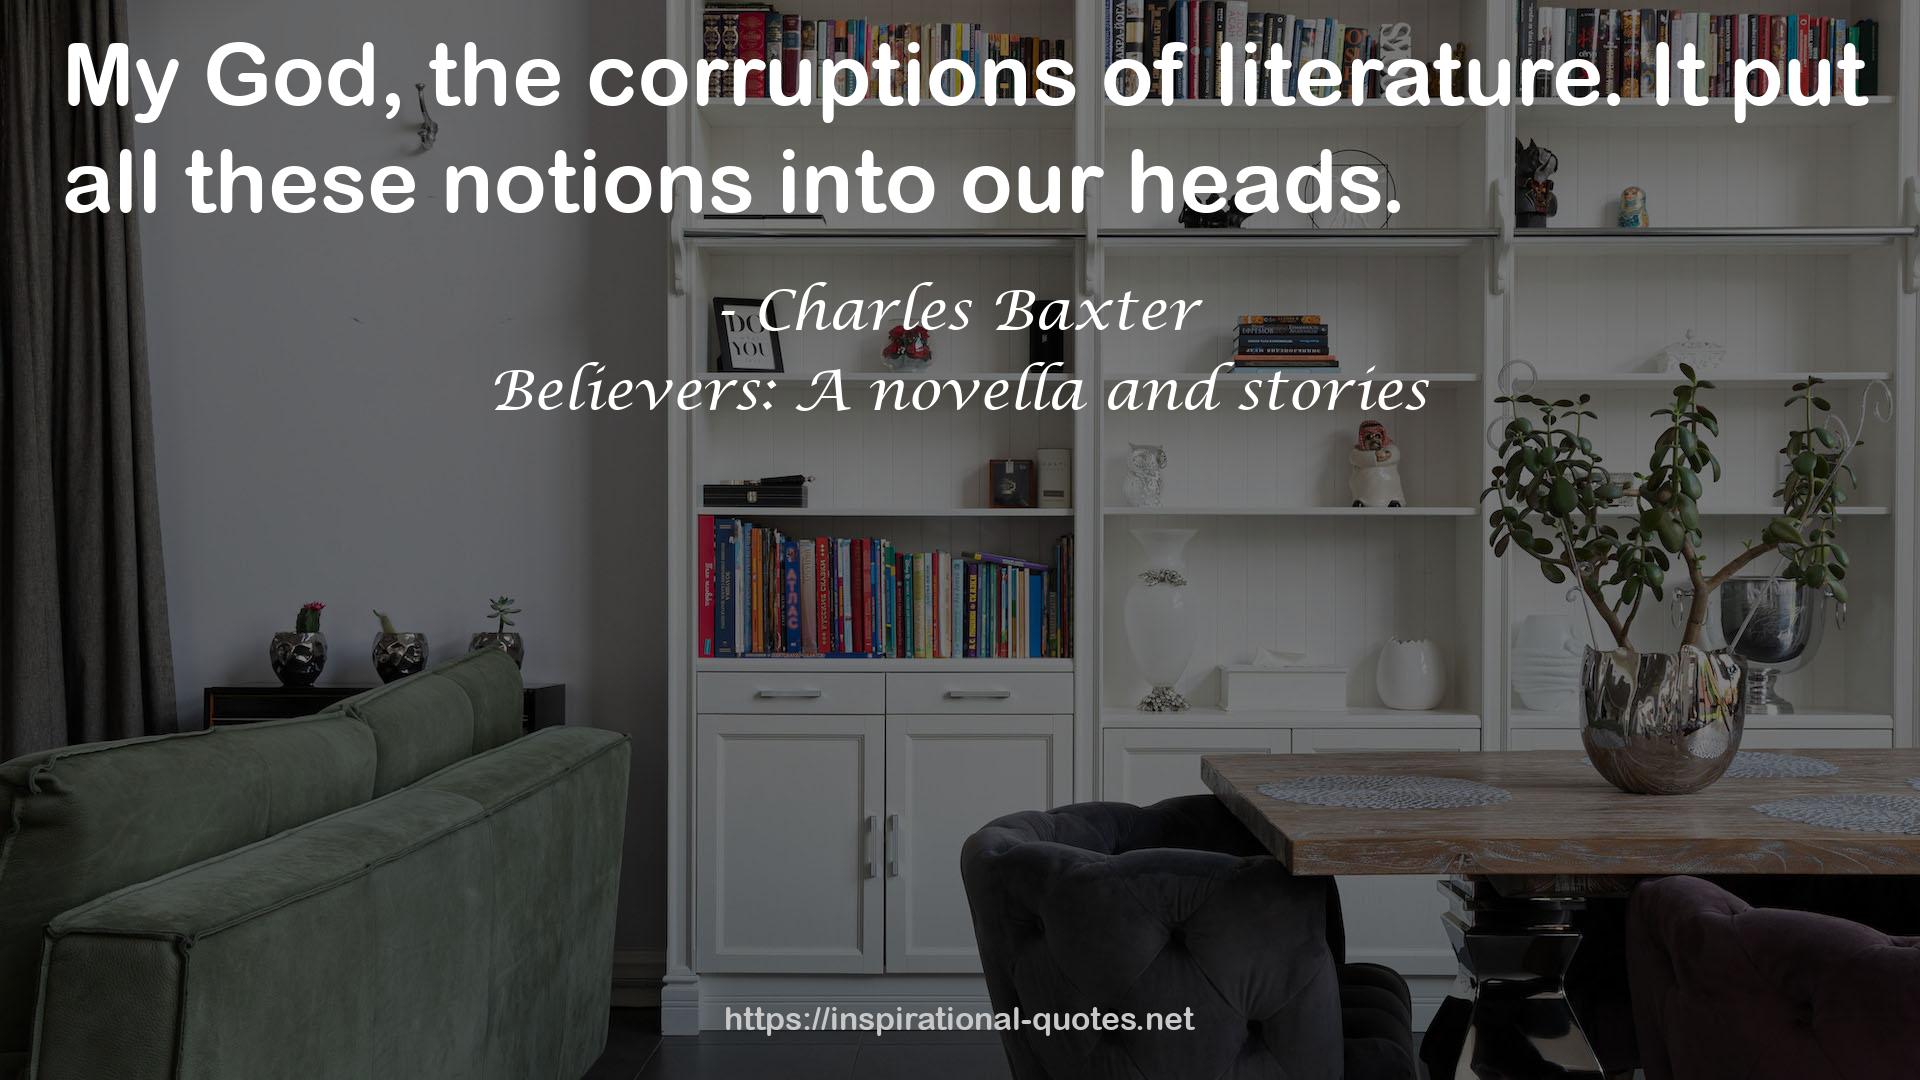 Believers: A novella and stories QUOTES